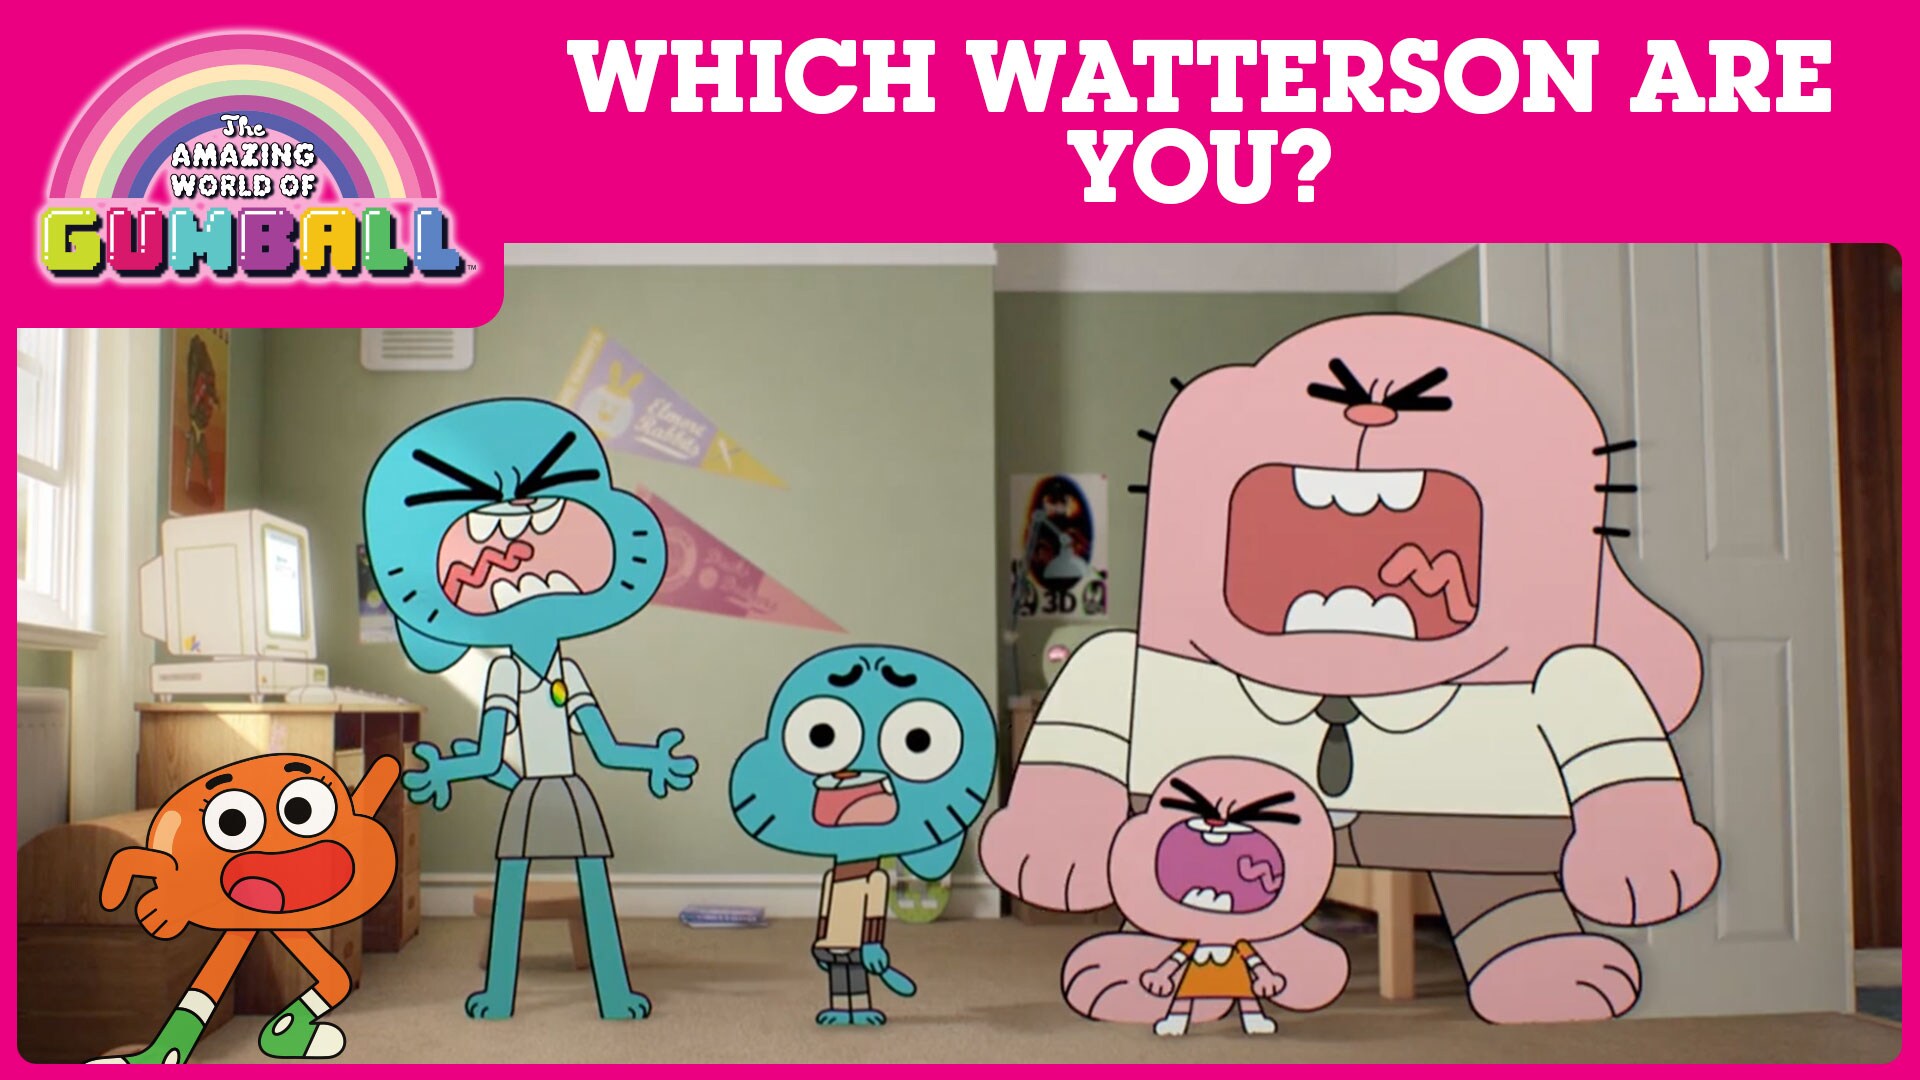 What amazing world of gumball character are you